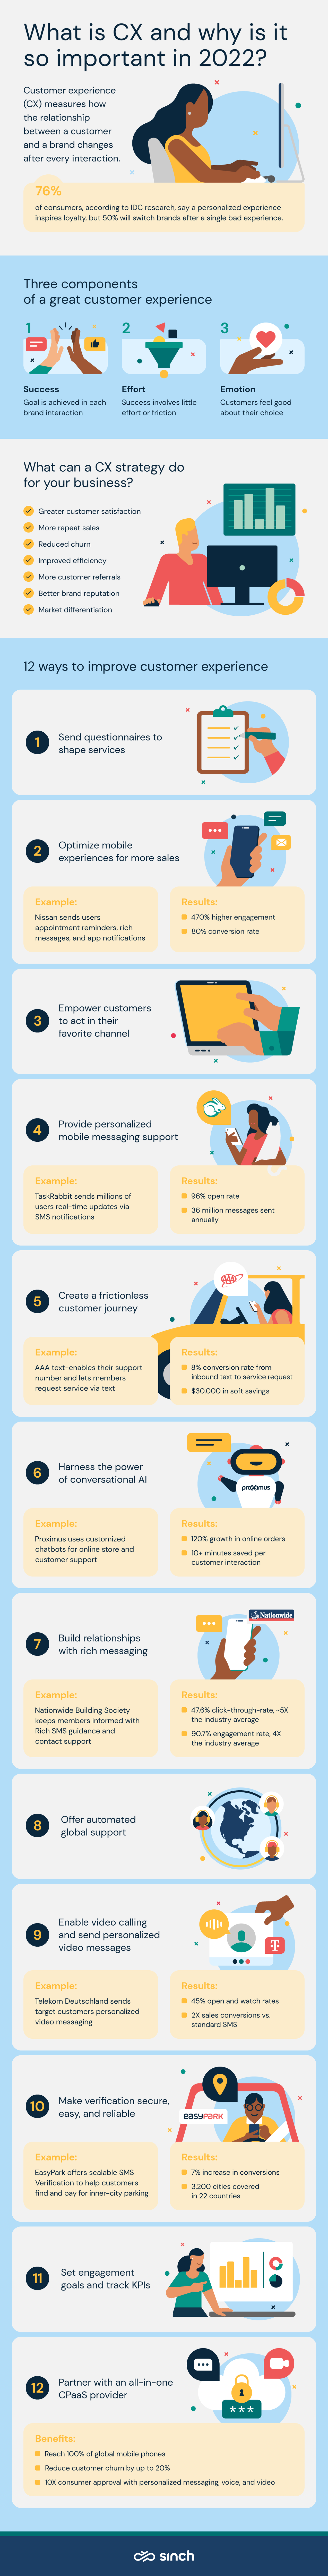 Infographic showing the ways to improve customer experience